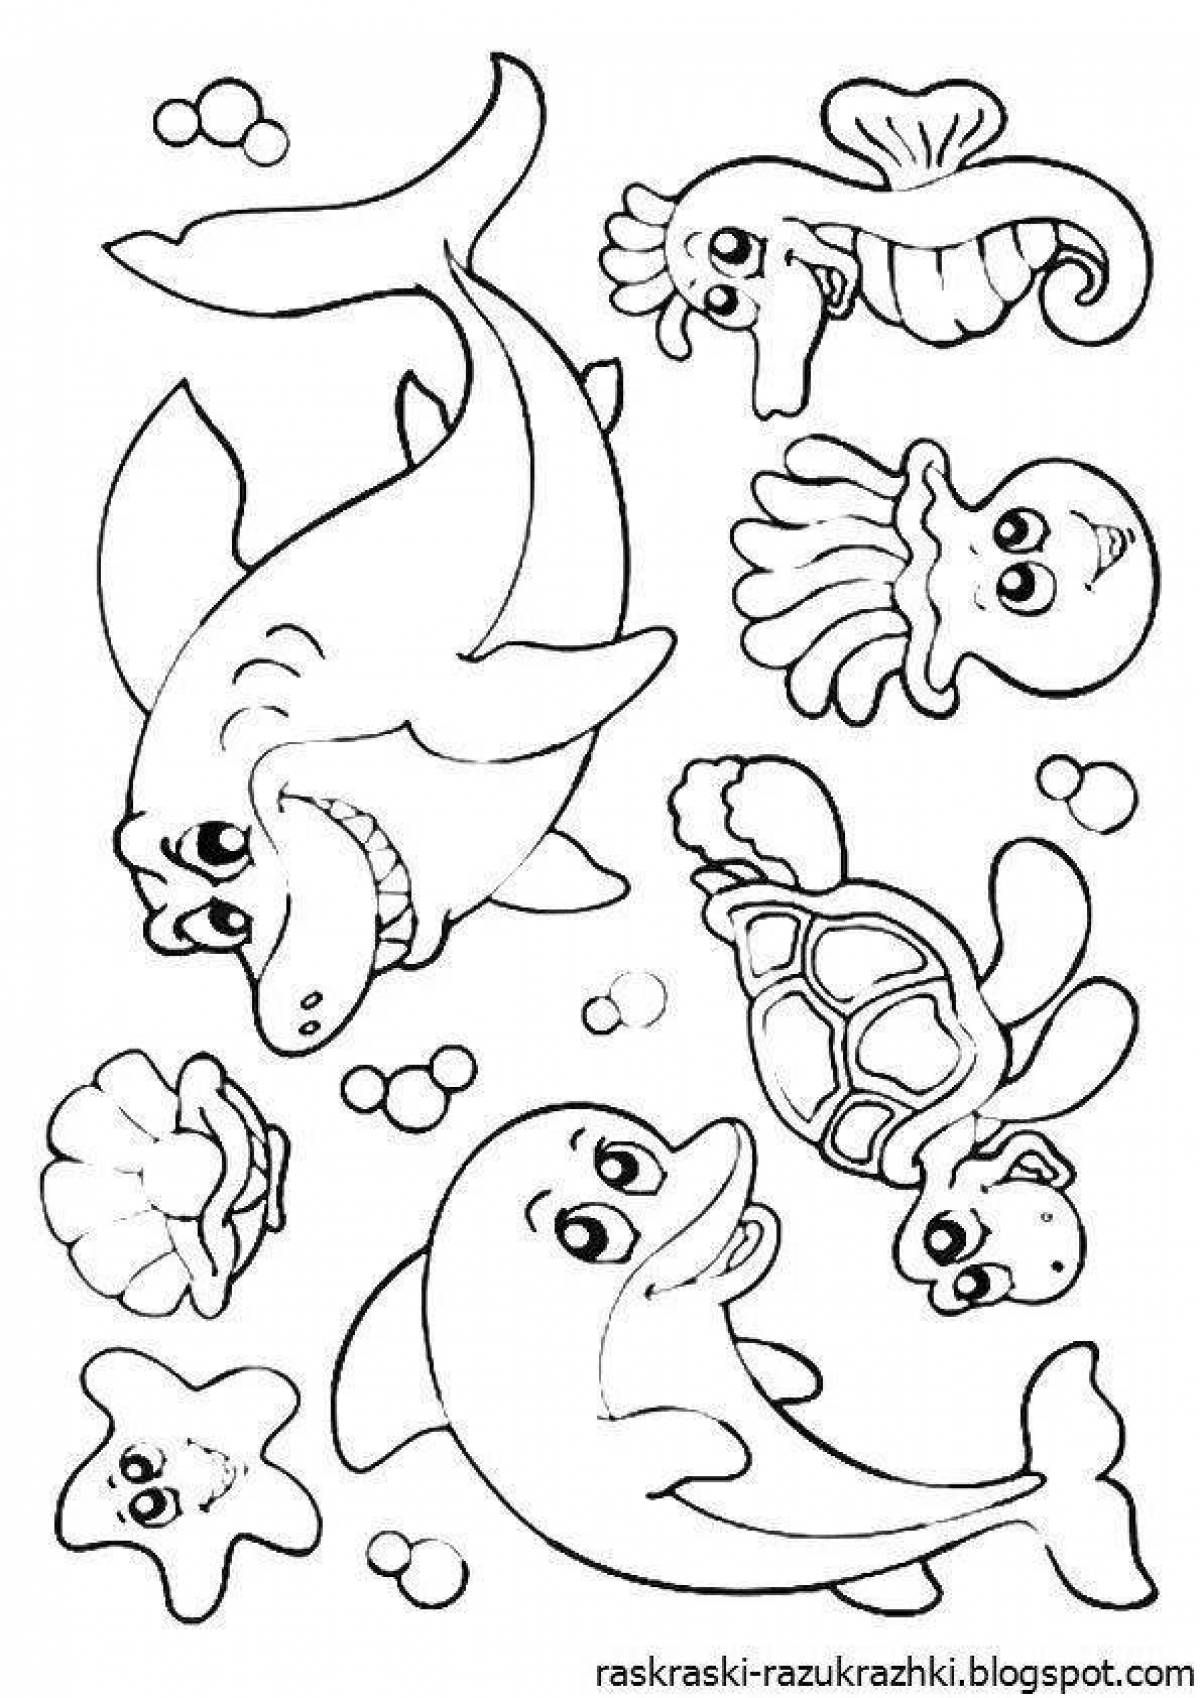 Amazing marine life coloring book for 6-7 year olds